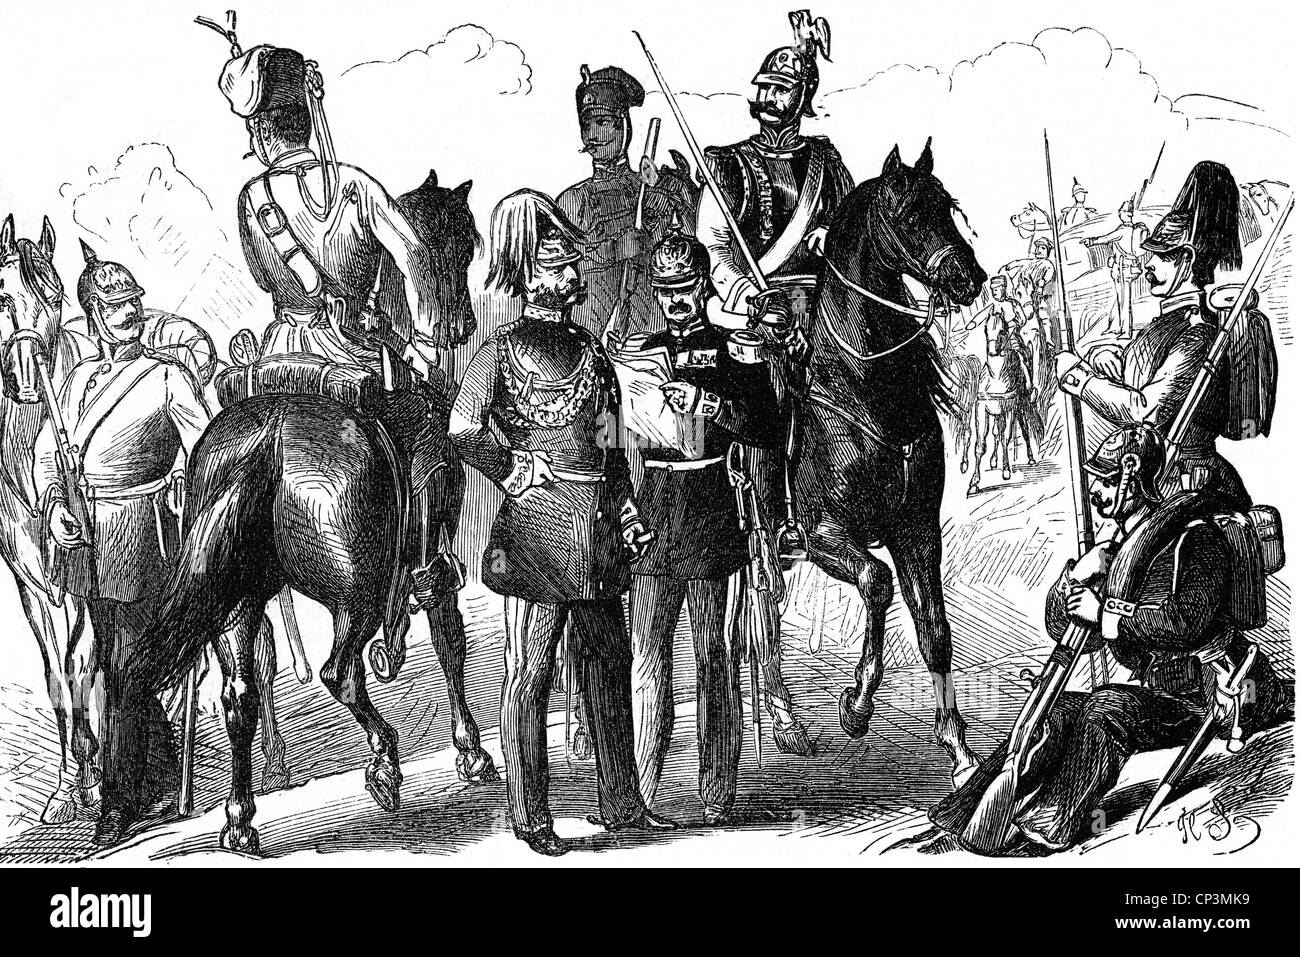 military, Germany, Prussia, army, various soldiers: dragoon, hussar of the guards, general, staff officer, Garde du Corps, infantryman of the guards, infantryman of the line, wood engraving after drawing by Hermann Scherenberg, circa 1870, Additional-Rights-Clearences-Not Available Stock Photo